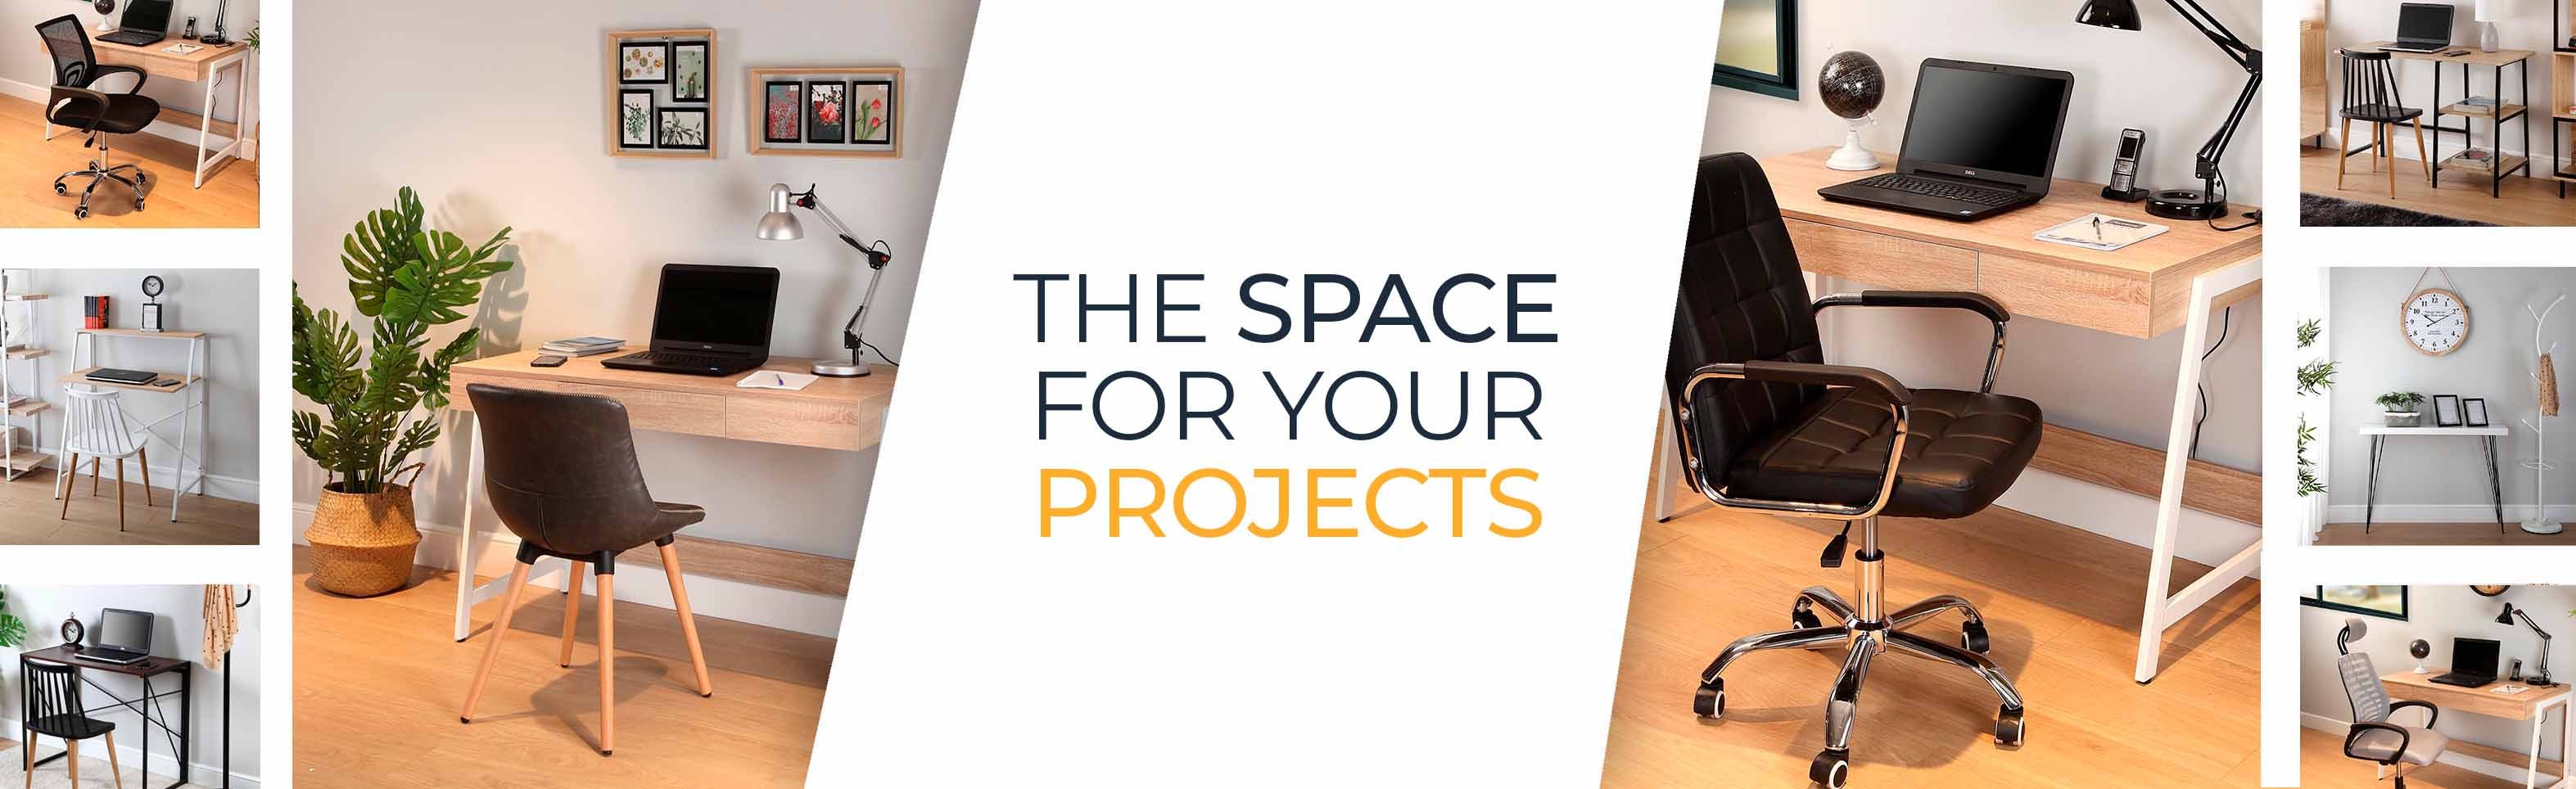 The space for your projects